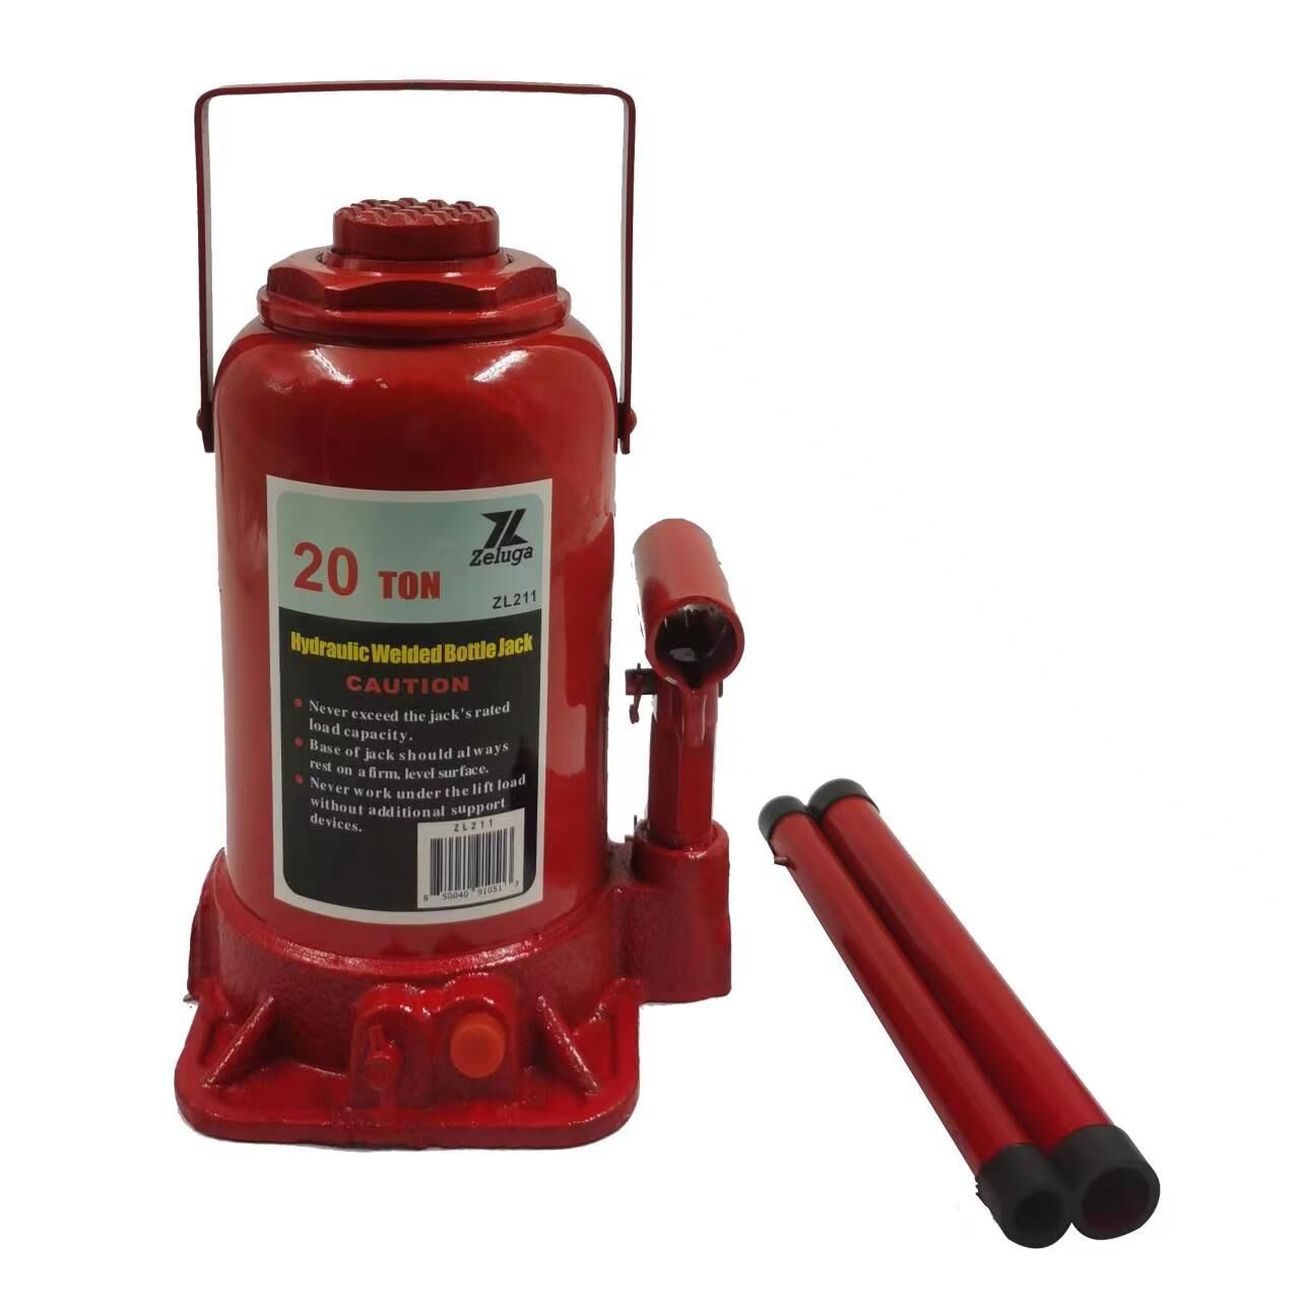 11-211 20 Ton 40,000 Lbs Capacity Hydraulic Welded Bottle Jack, Red